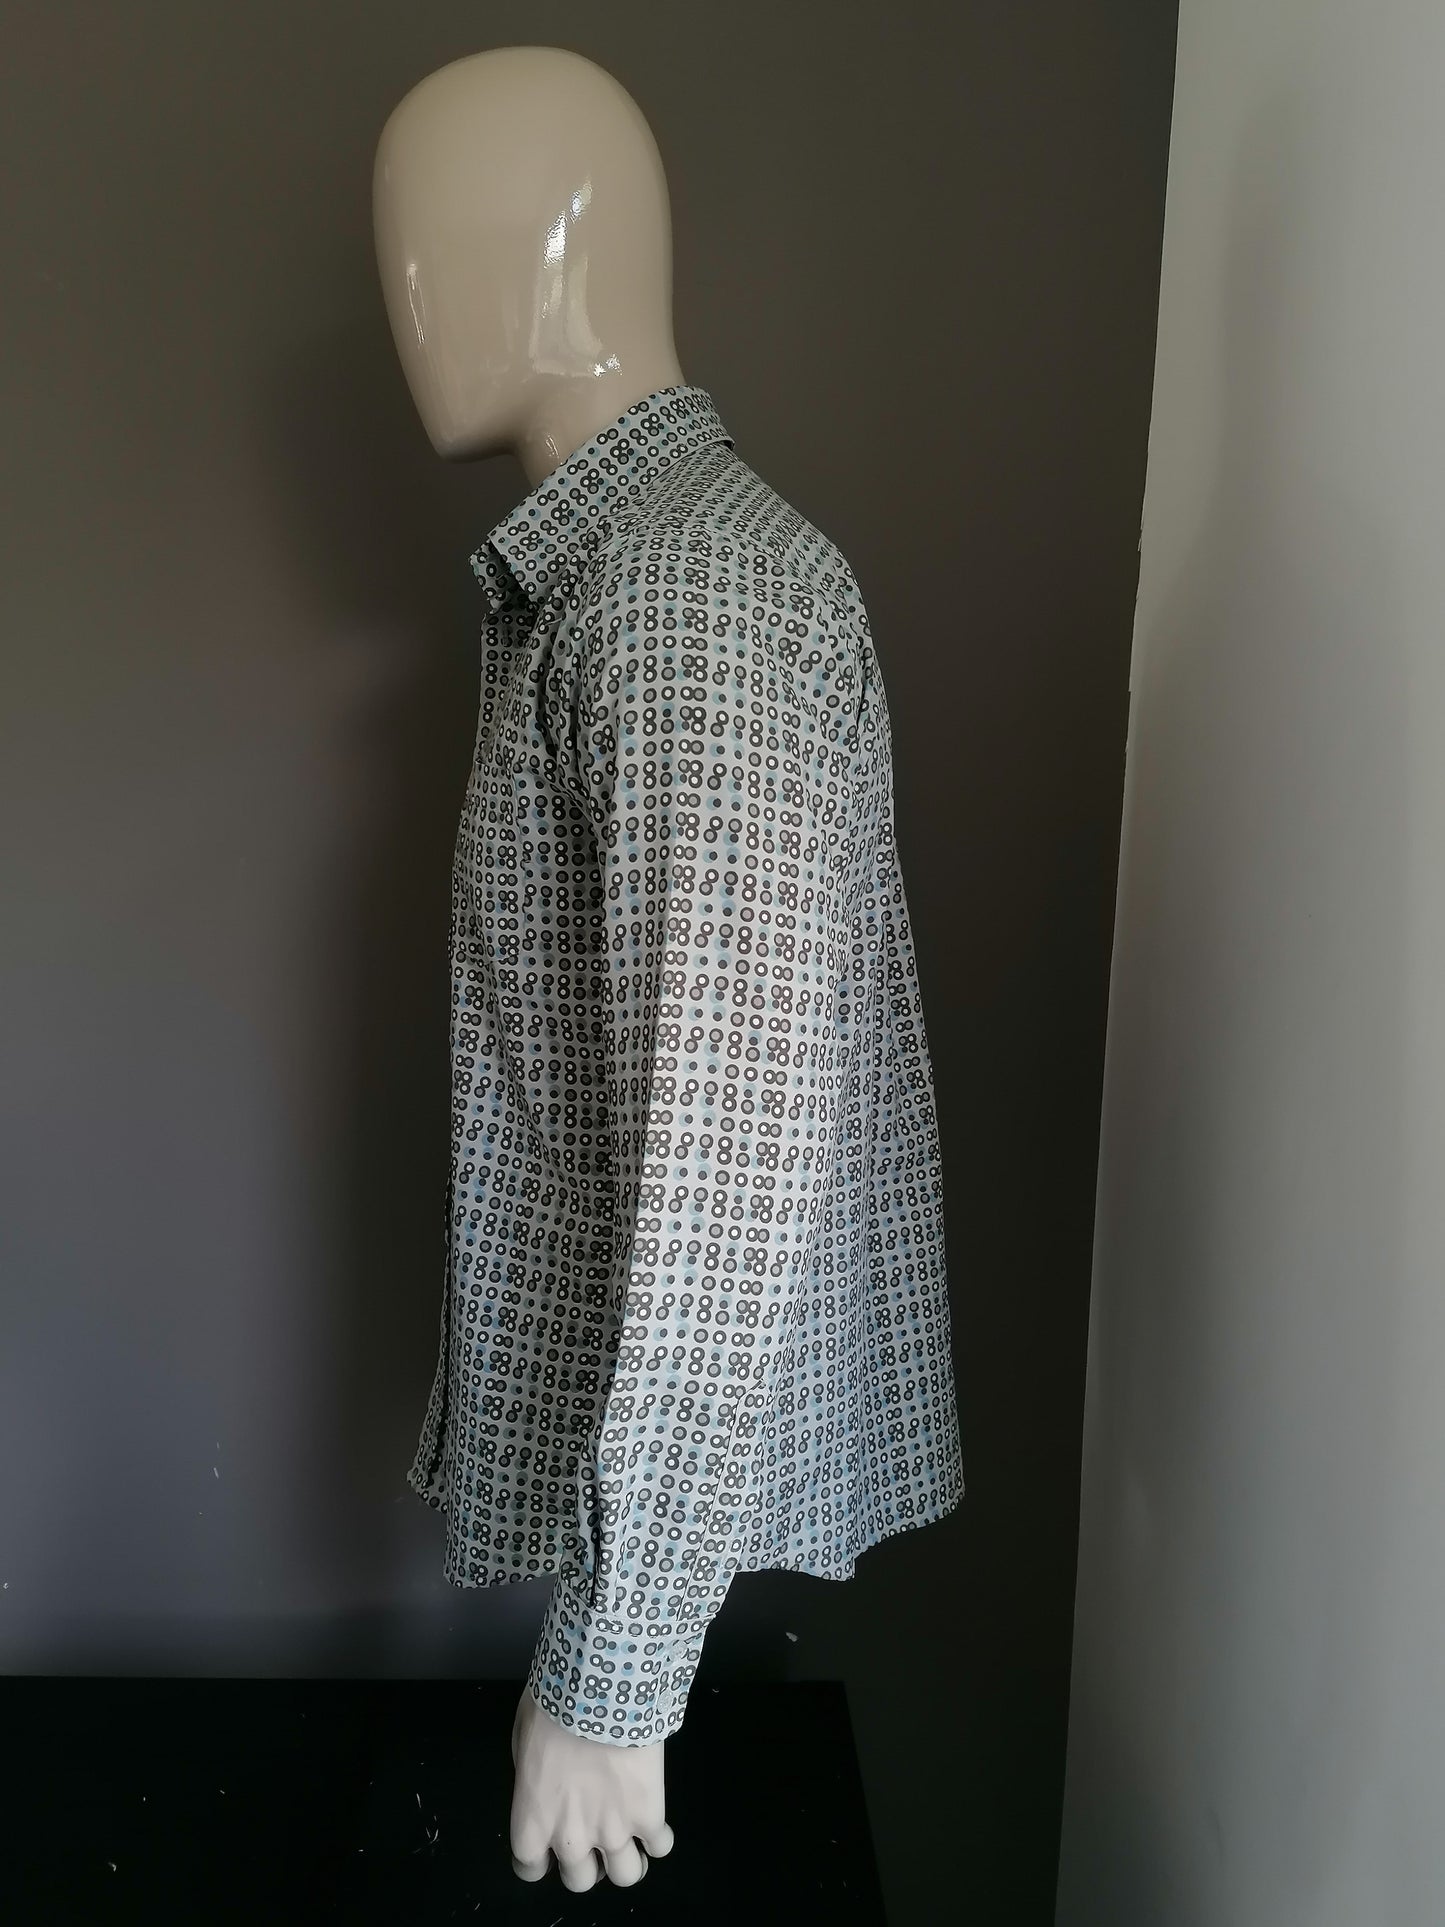 Chemise Philip Russel. Impression bleu gris. Taille L. 100% polyester